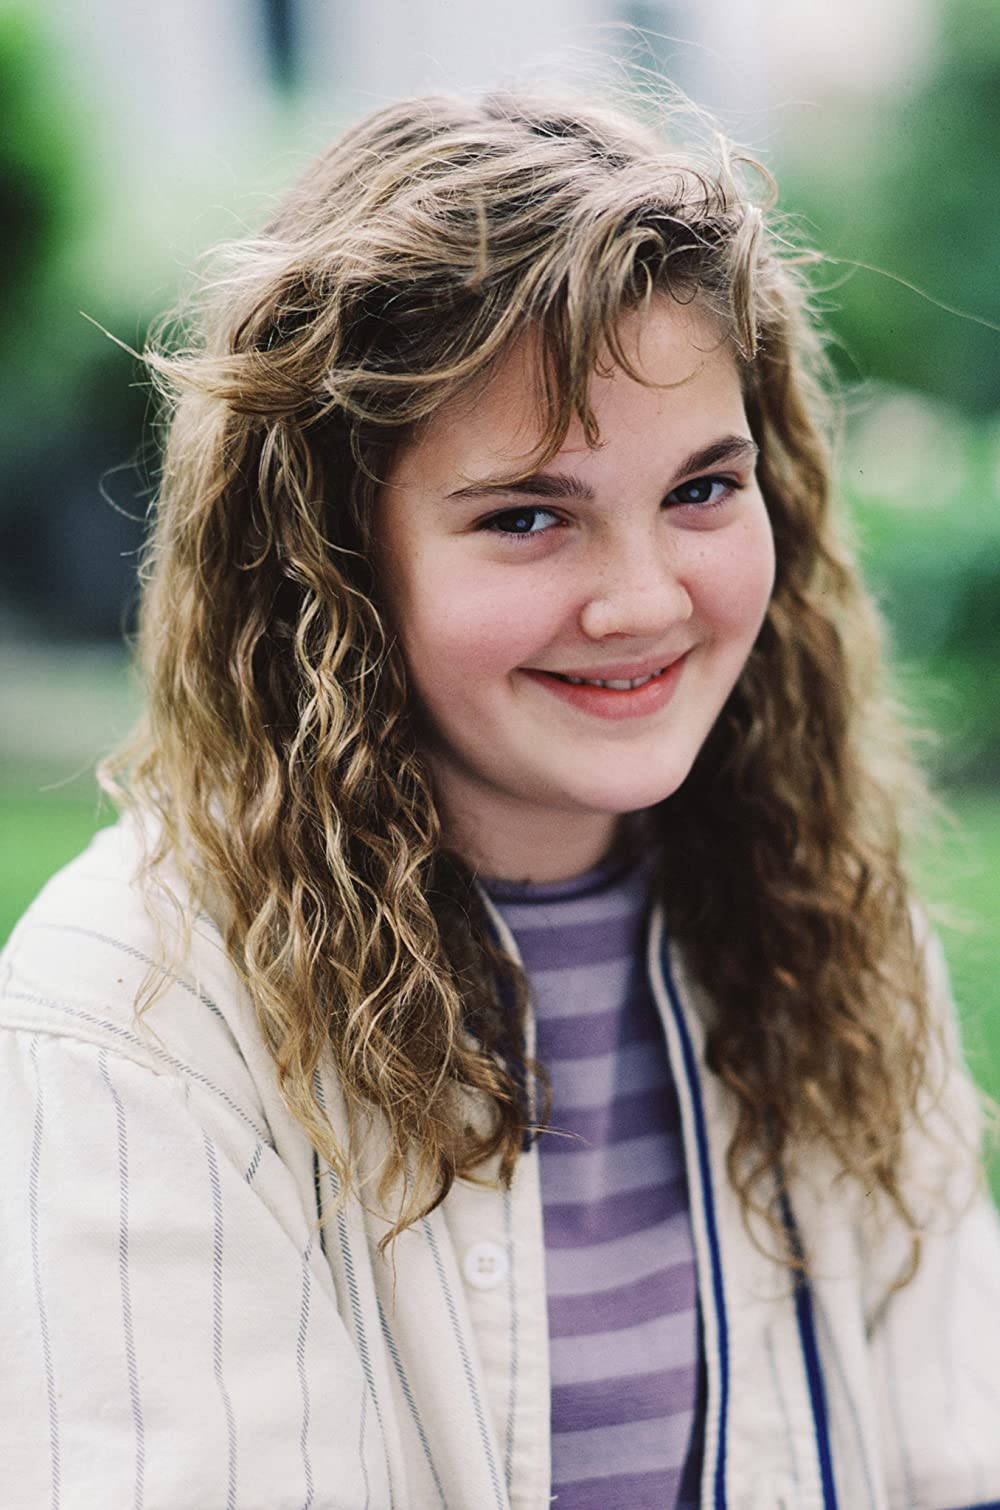 Young Drew Barrymore Wallpaper